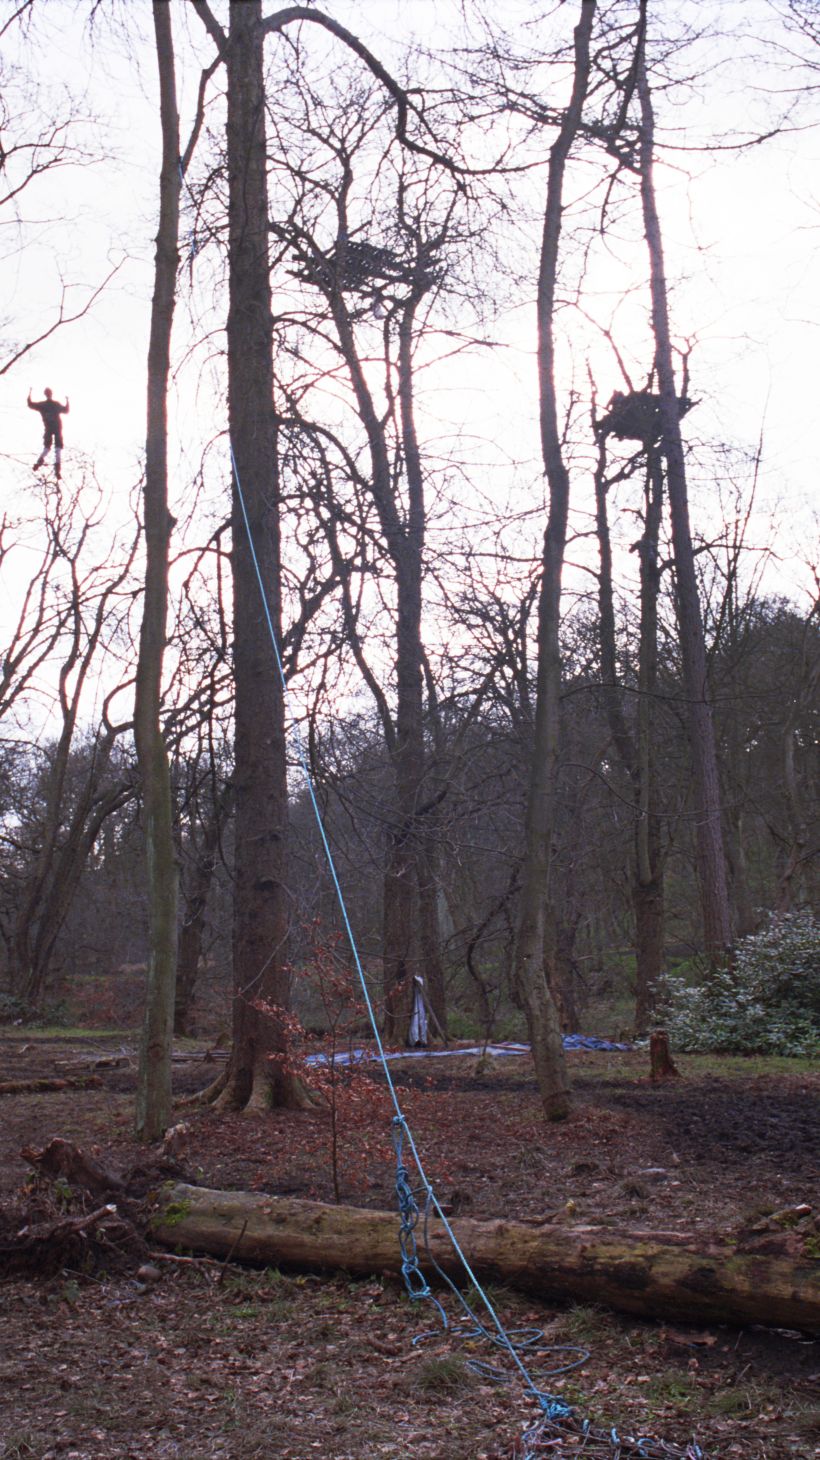 Anti-roads protestors lived in the trees at Stanworth Valley in 1995